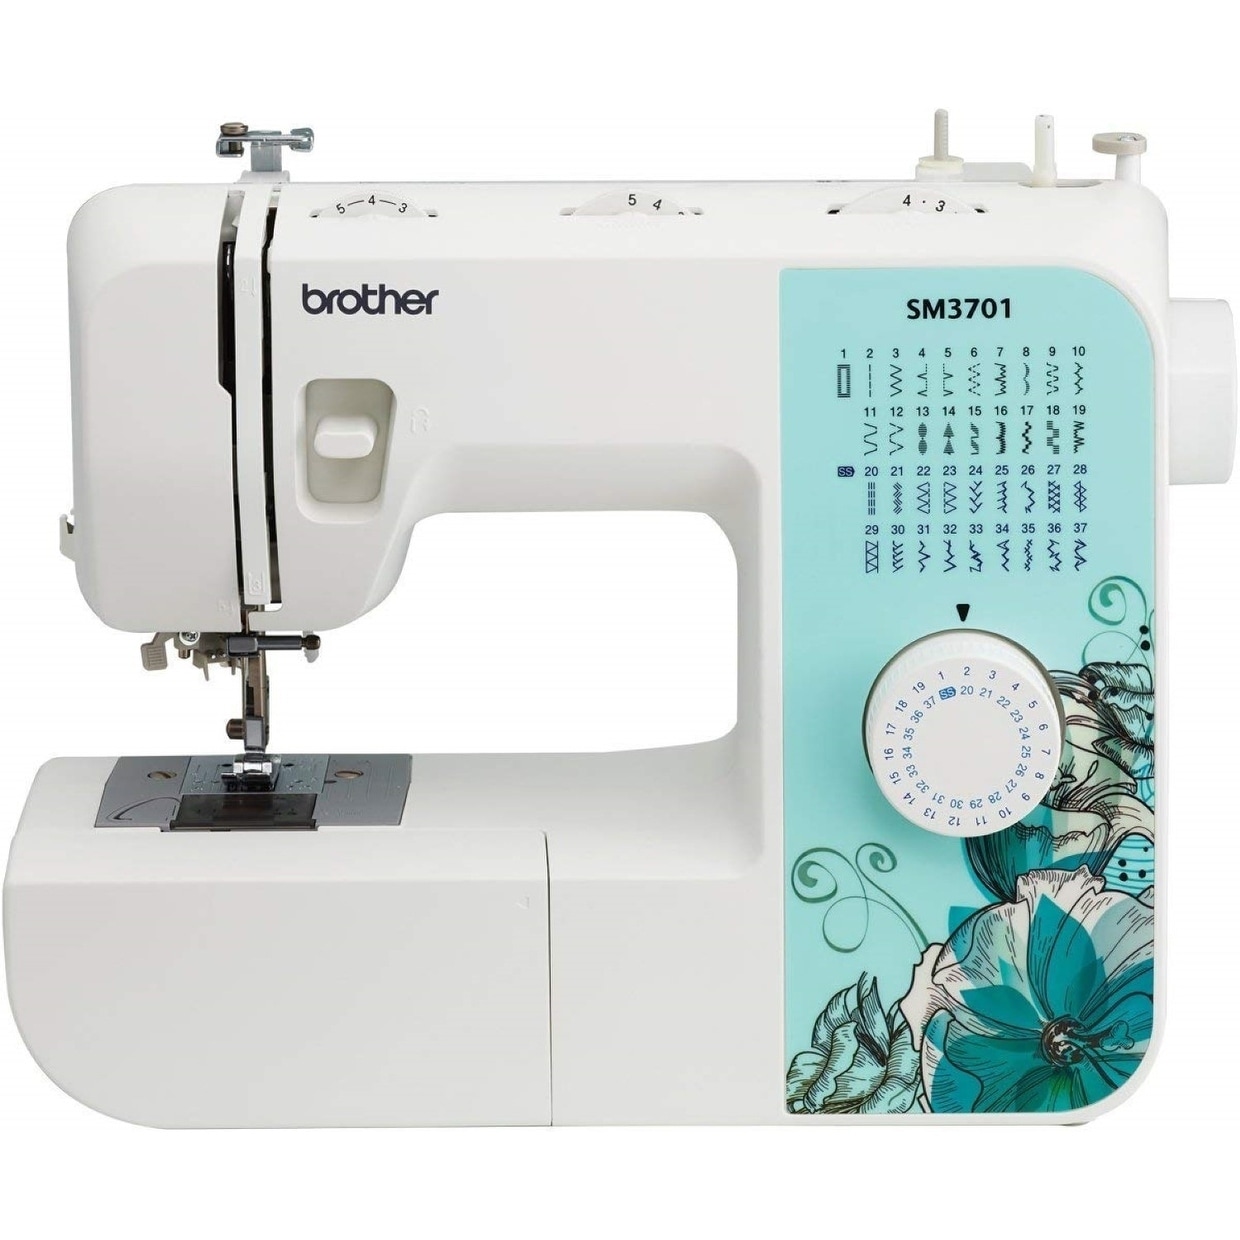 Brother SE2000 Sewing and Embroidery Machine with LCD Display with Sewing  Bundle 